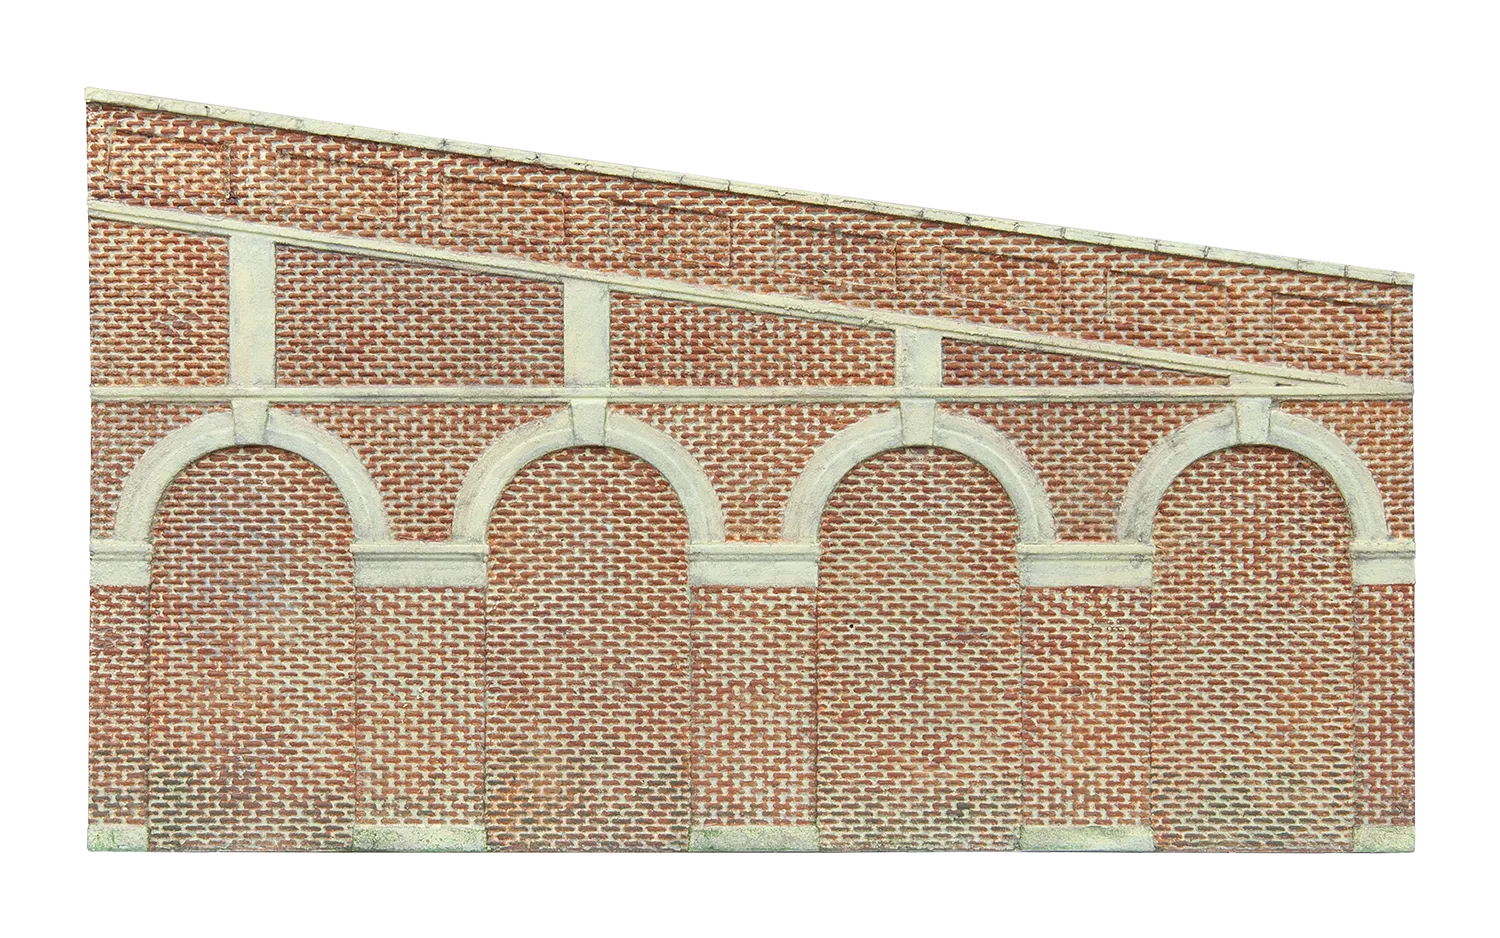 High Stepped Arched Retaining Walls x 2 (Red Brick) - Chester Model Centre